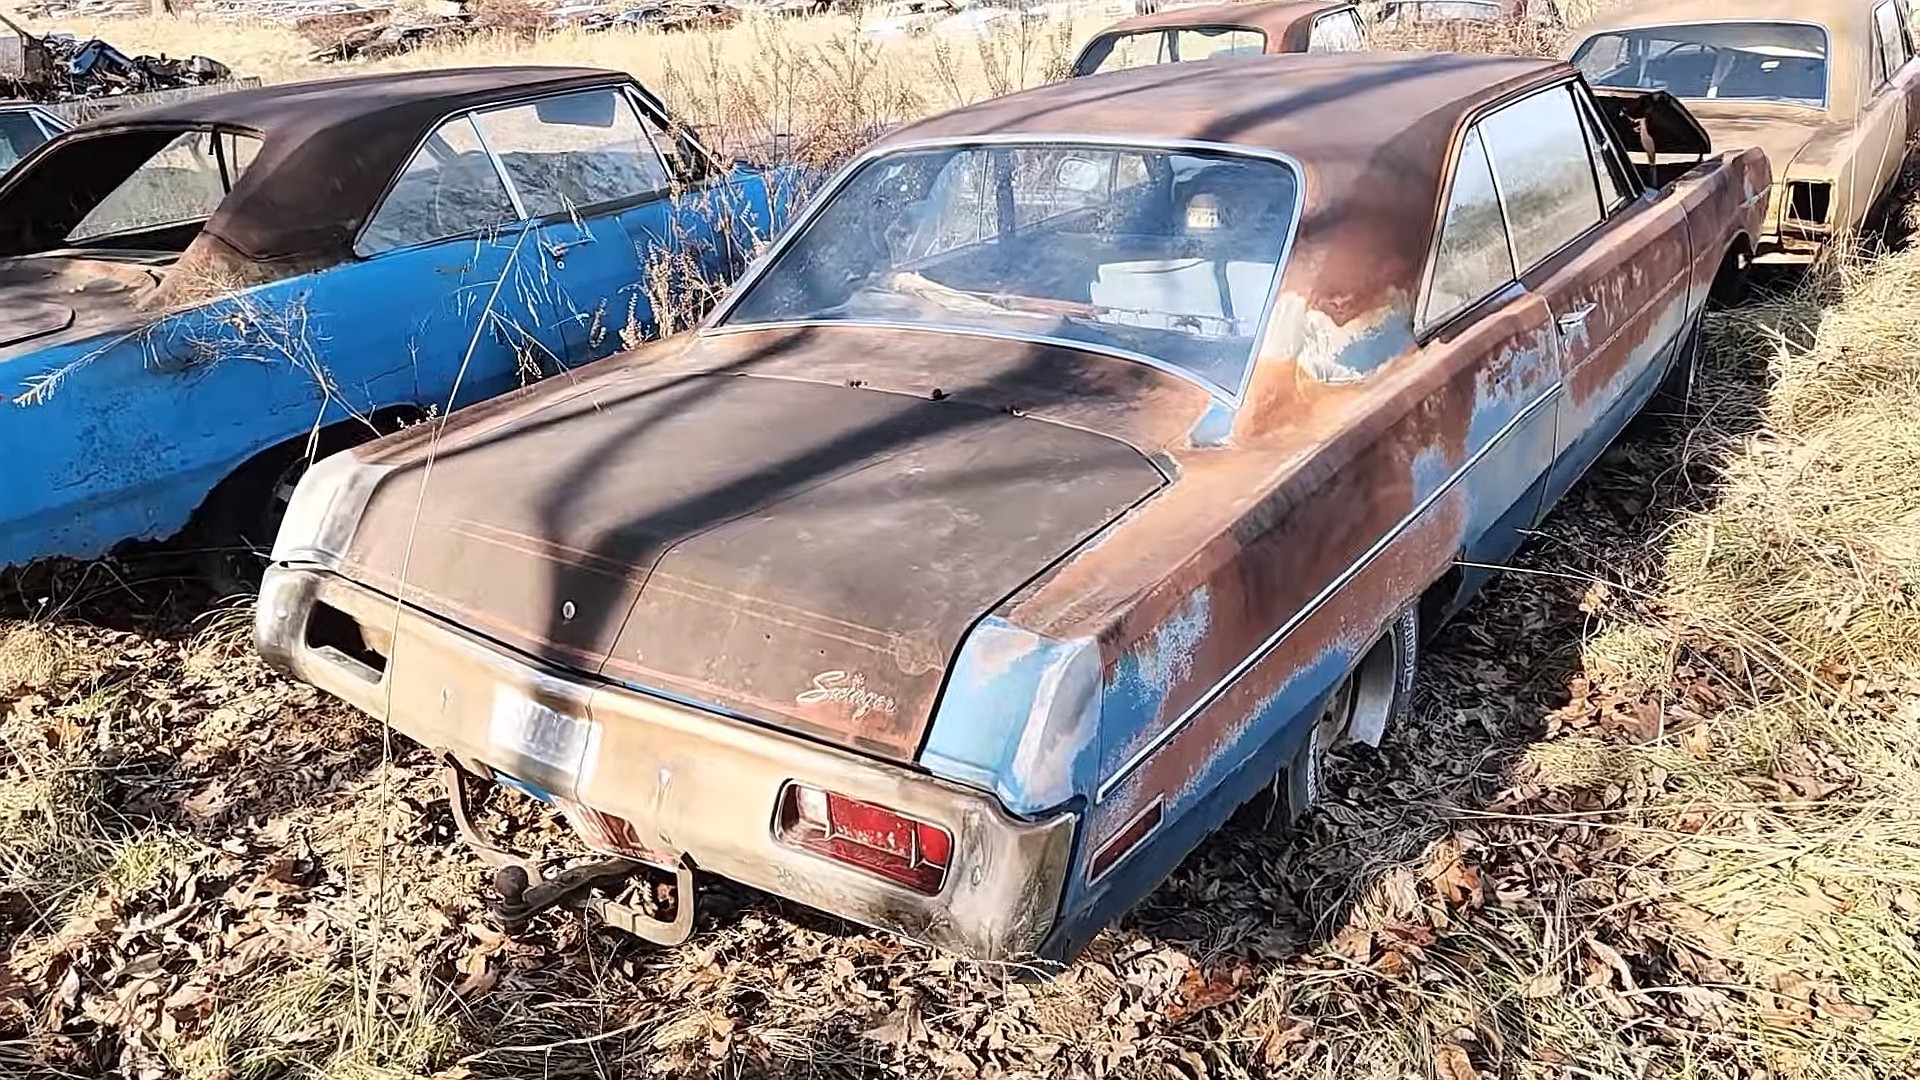 Worlds Rarest 1970 Dodge Dart Is a Super Swinger Automatic Rotting Away in a Backyard picture